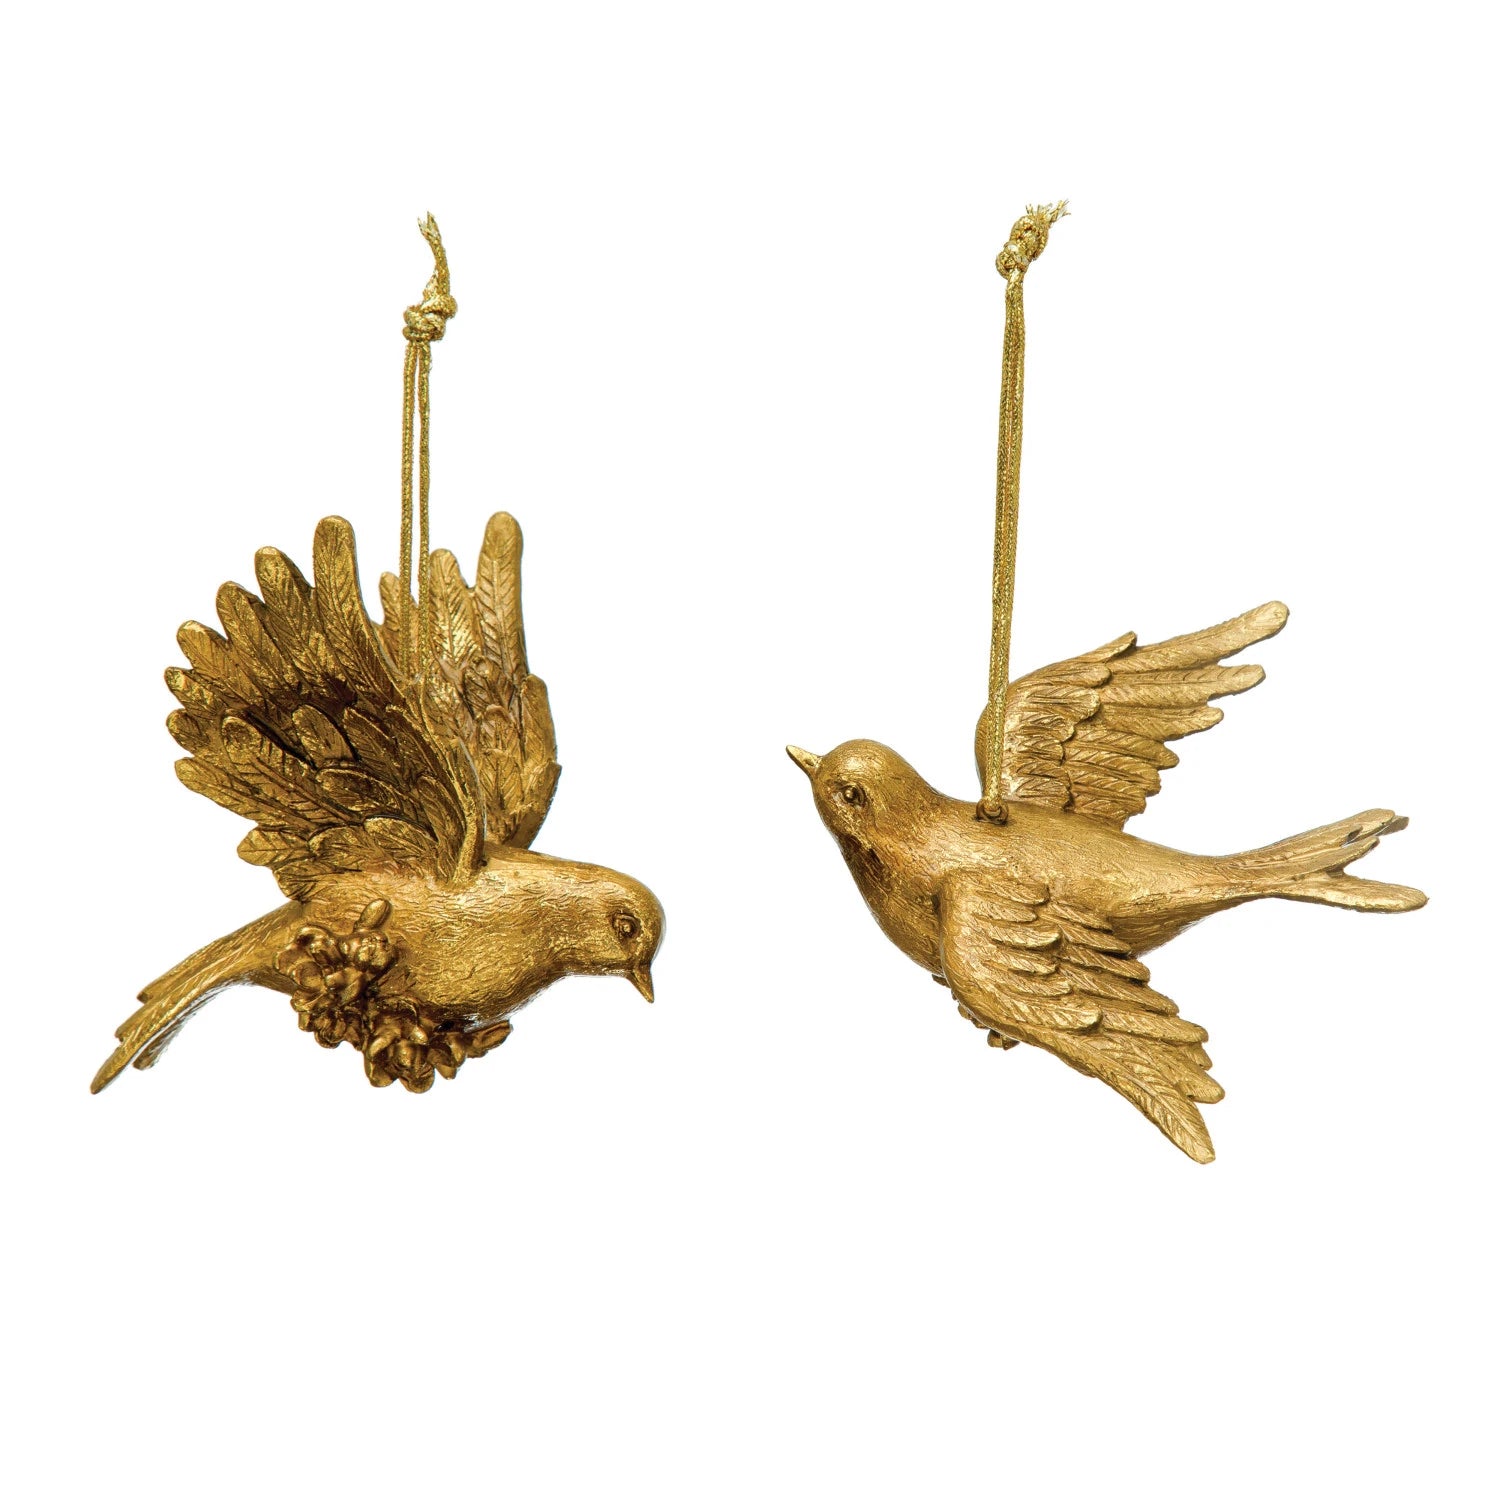 Two styles of resin dove ornaments with a gold finish